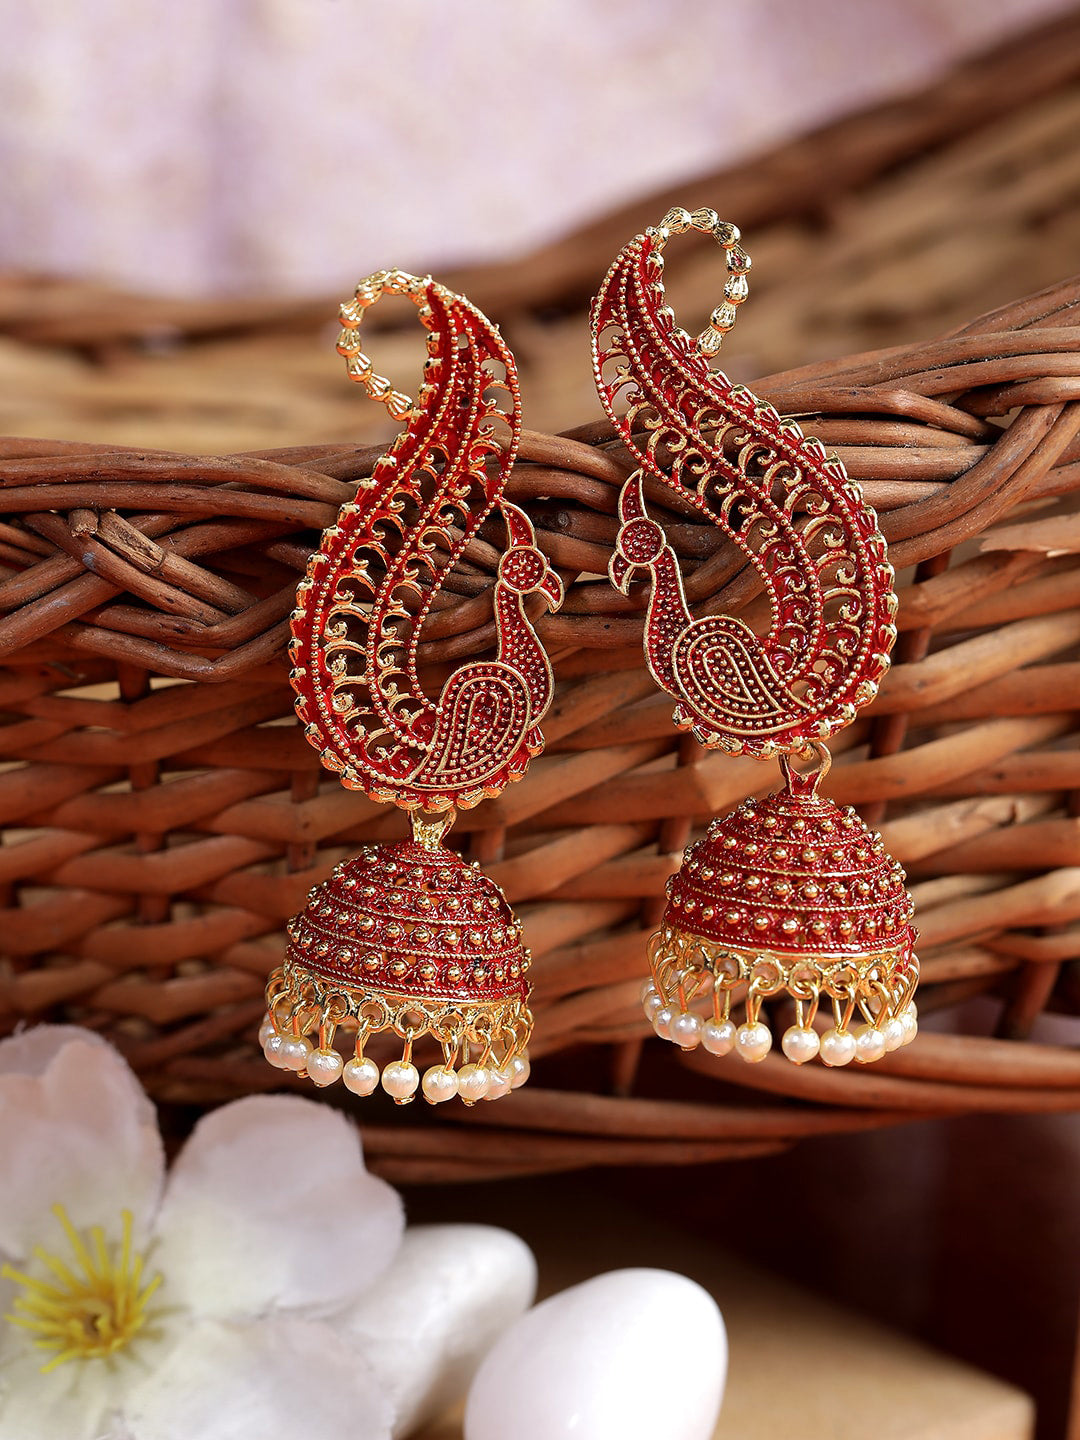 Anikas Creation Red & Gold-Plated Peacock Shaped Jhumkas - Distacart